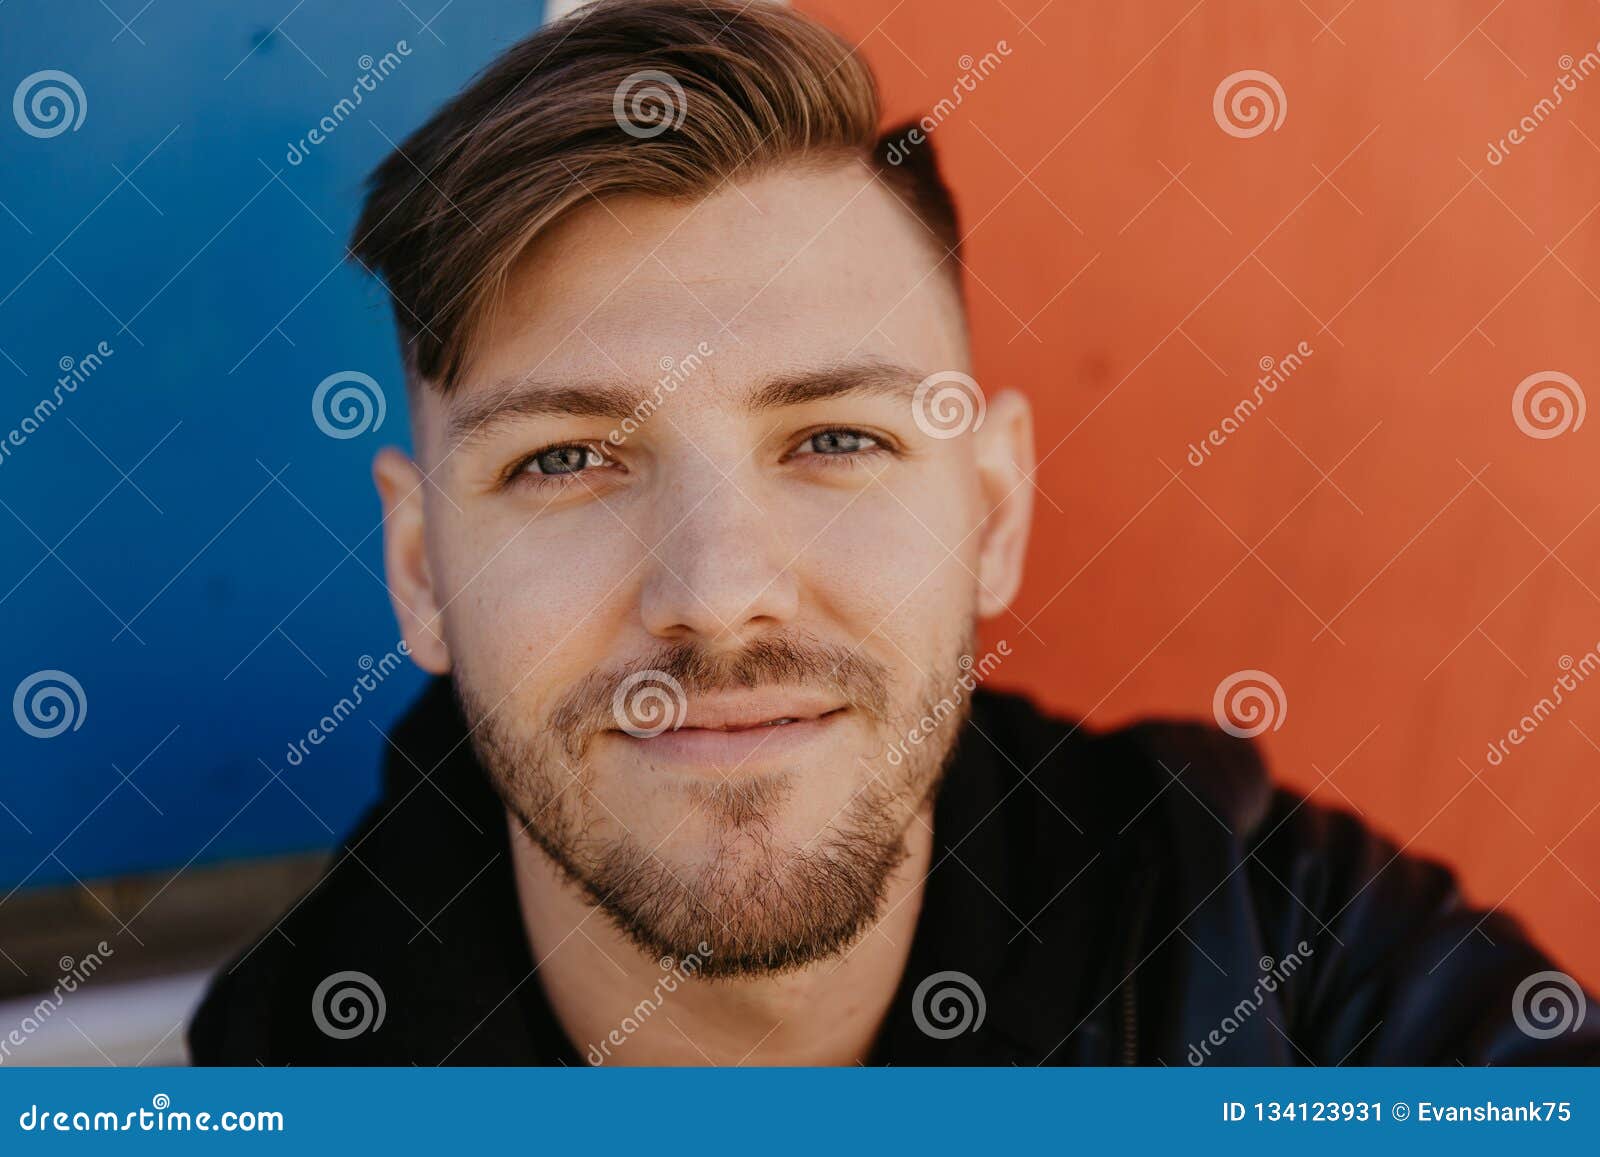 handsome attractive male adult person model in winter autumn season head shots face up close expression portraits vivid colors